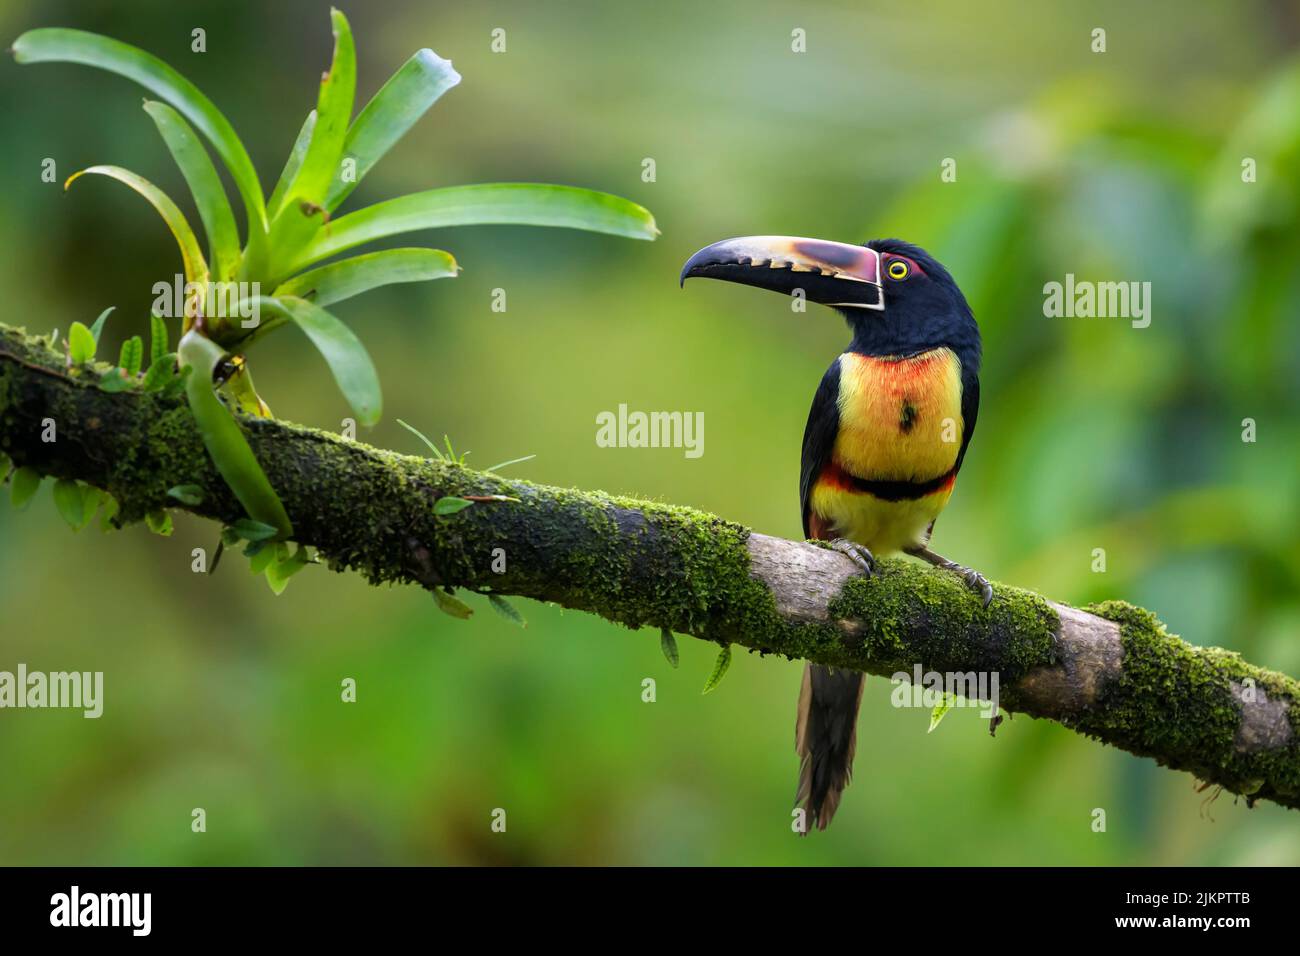 Collared aracari (Pteroglossus torquatus) perched on a branch with moss and bromelia, Costa Rica Stock Photo